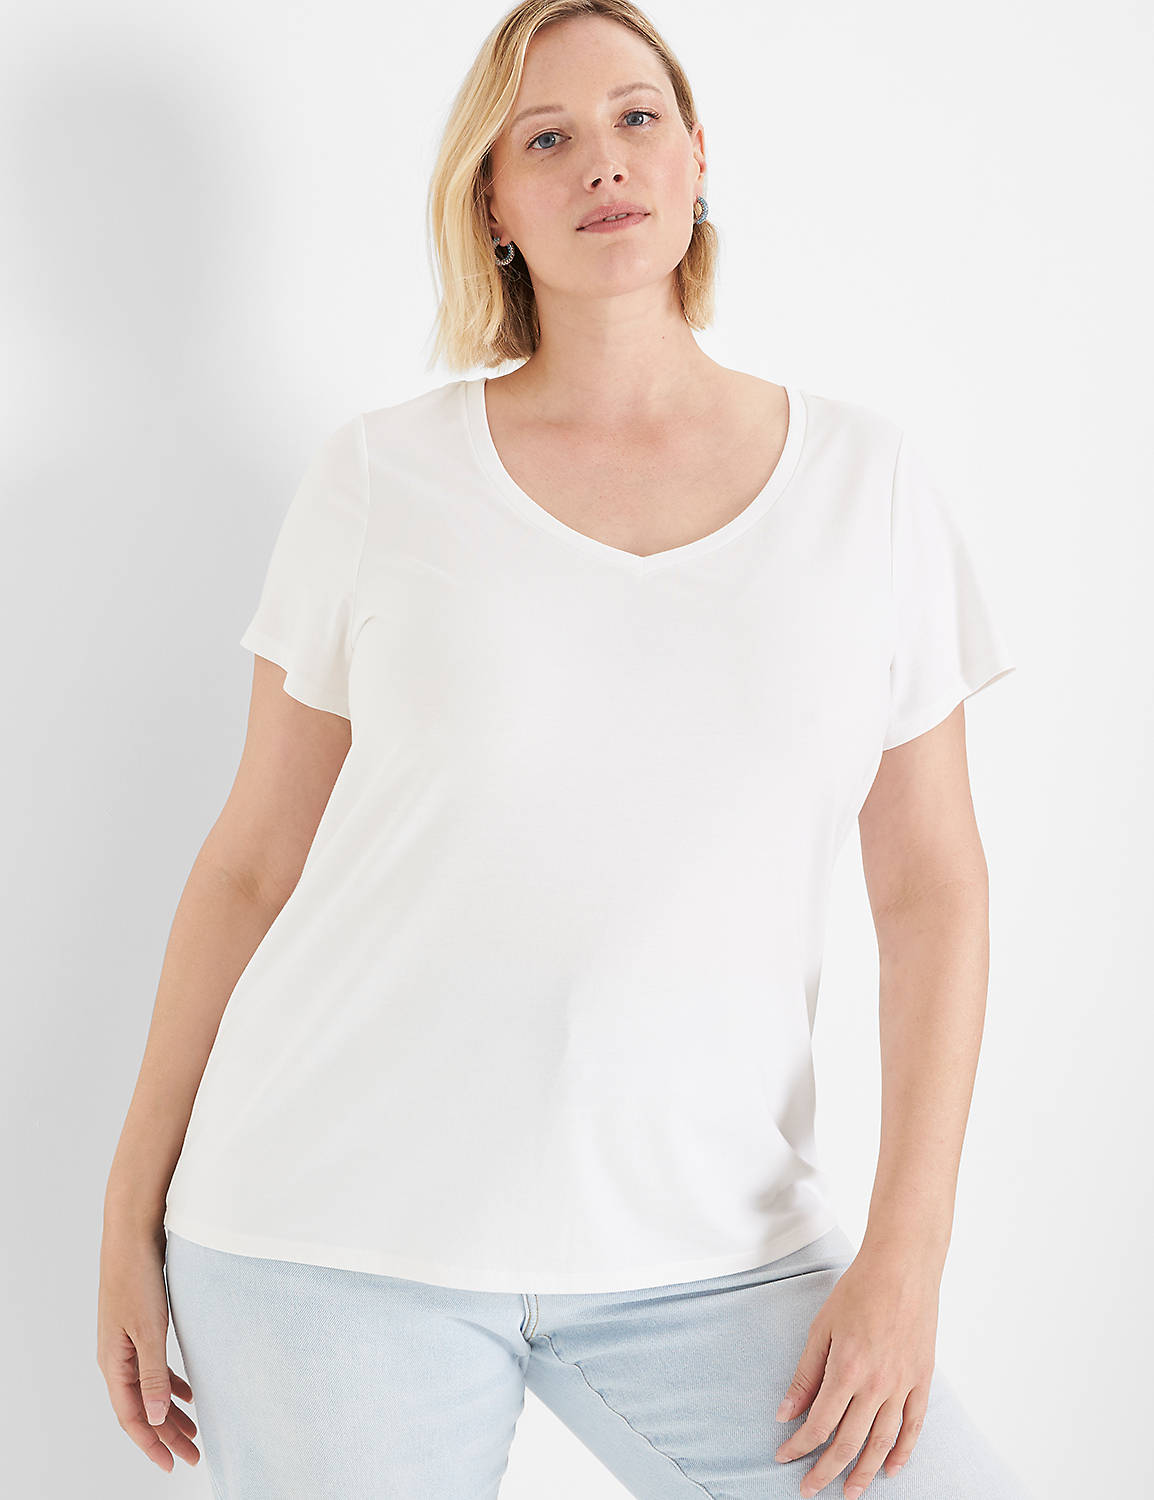 Classic Short Sleeve Vneck Tee 1136 Product Image 1